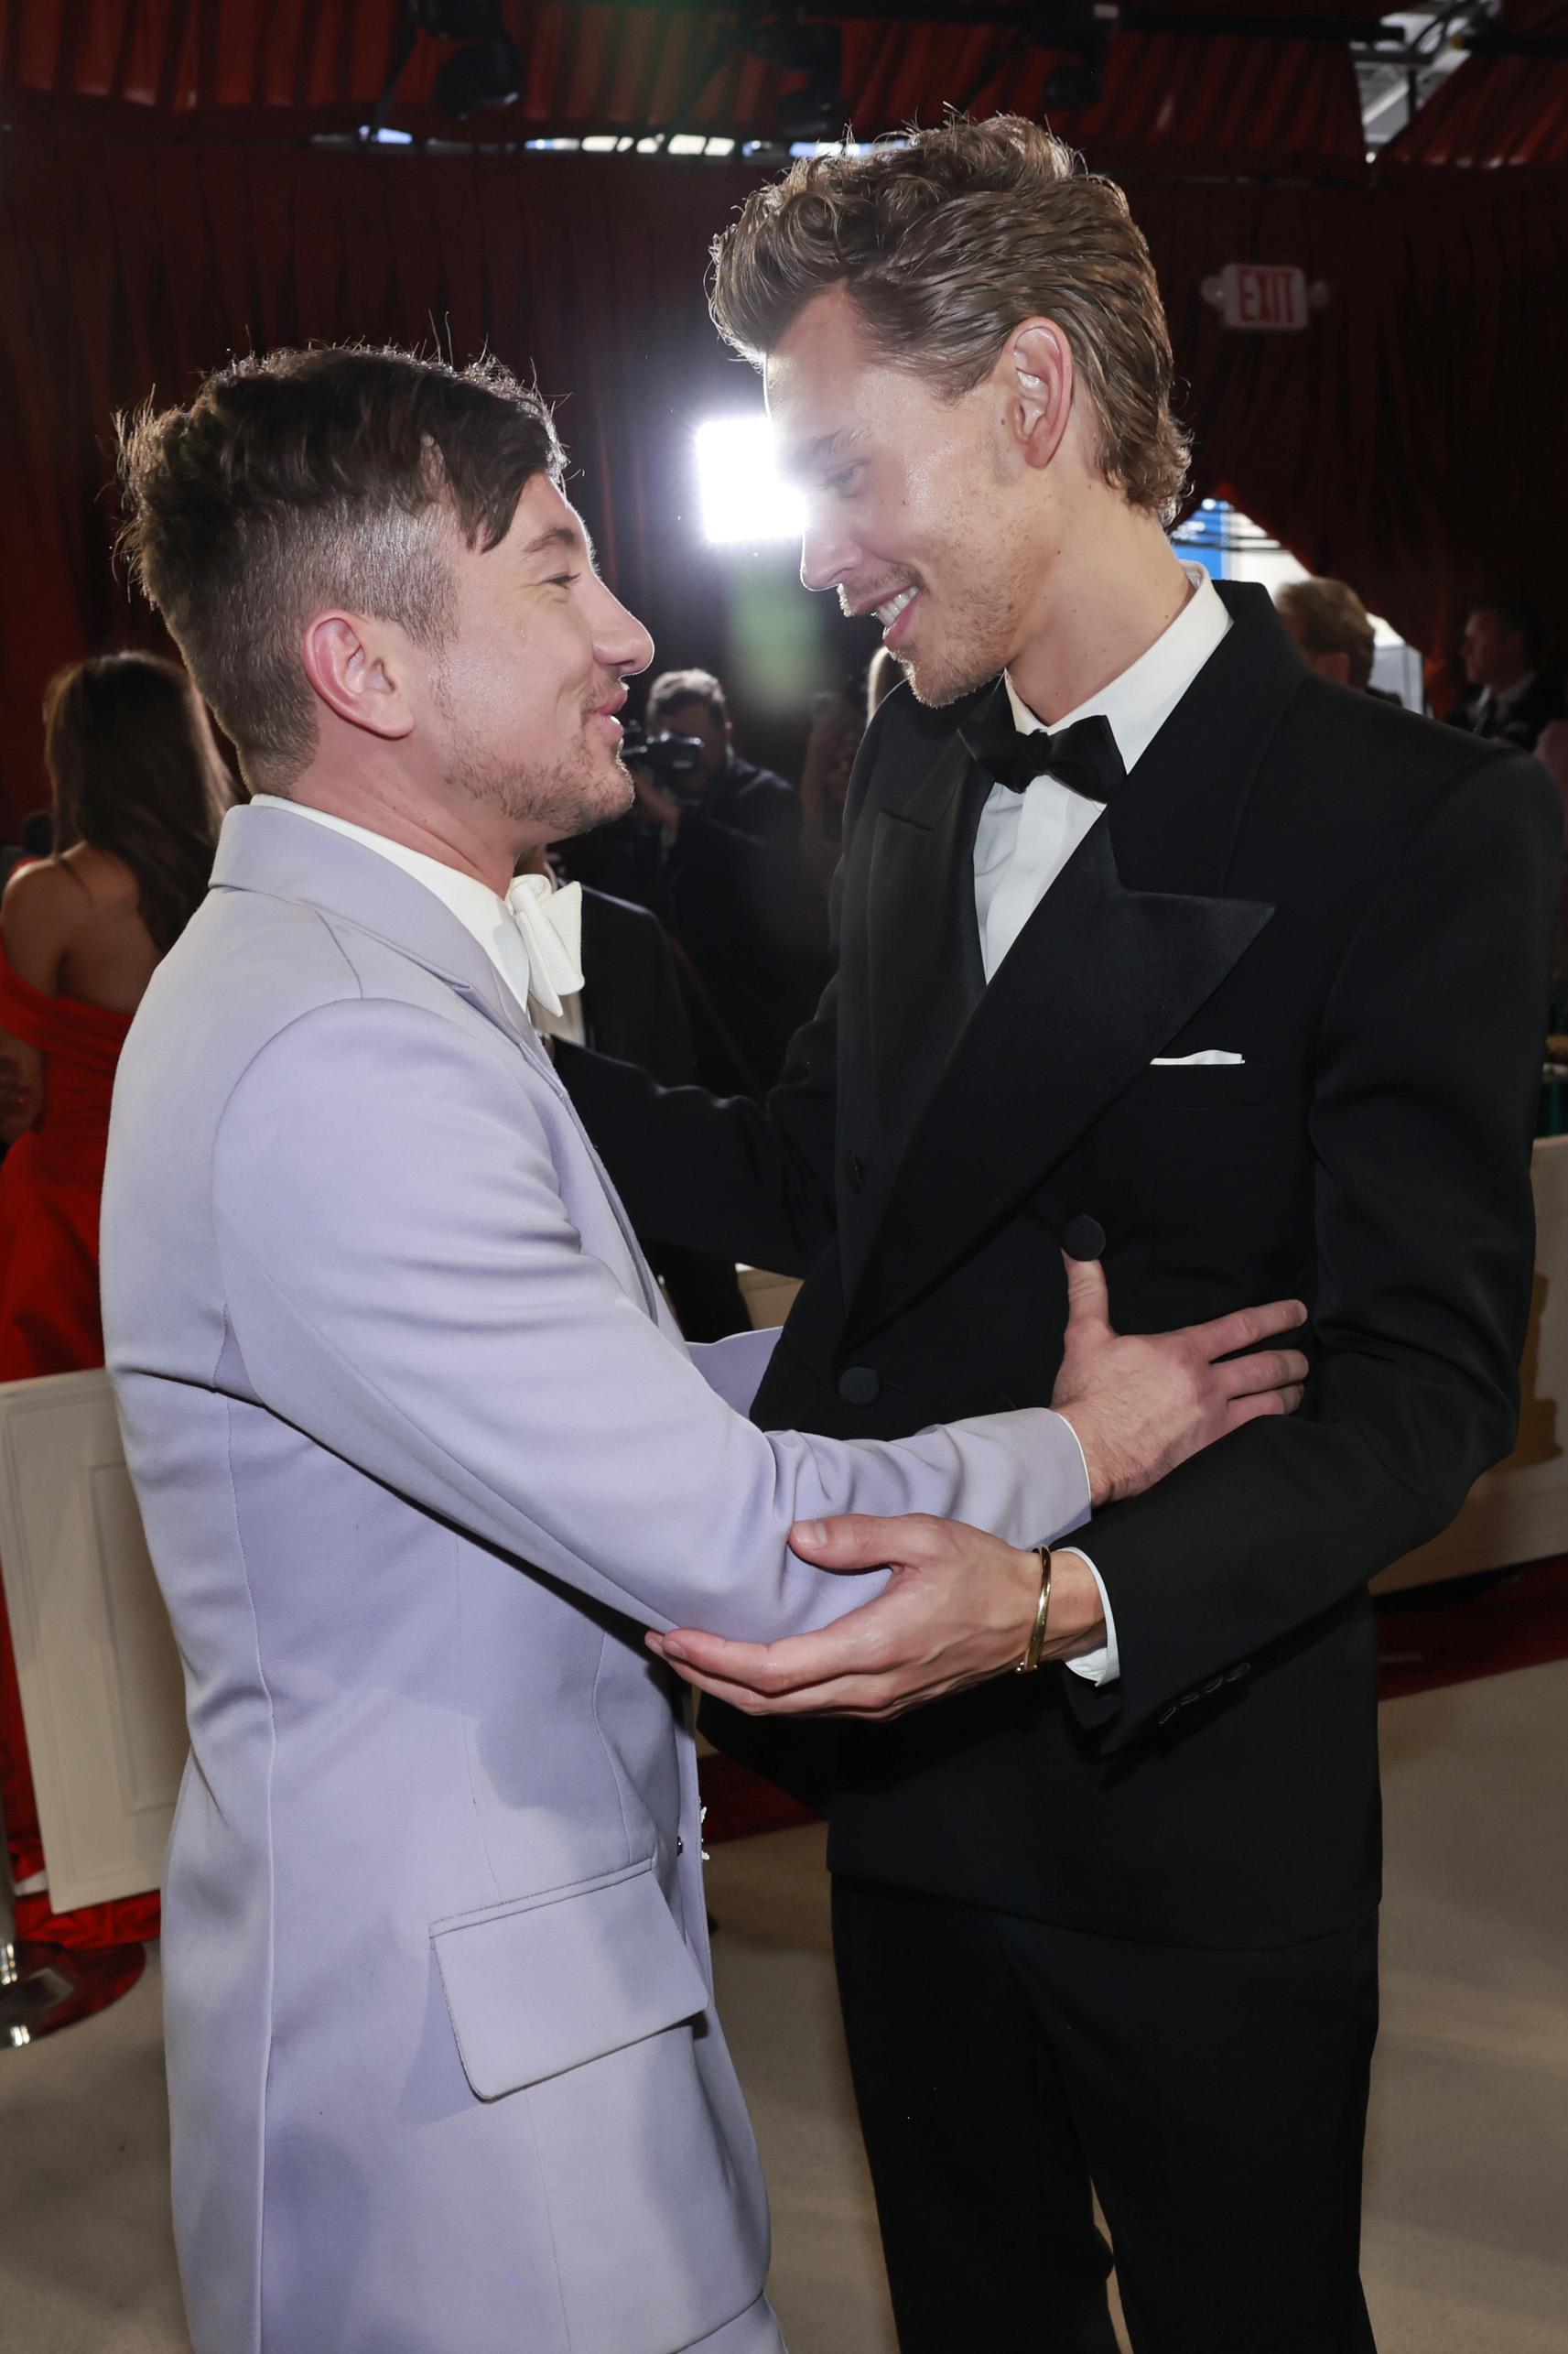 barry and austin butler talking at an event